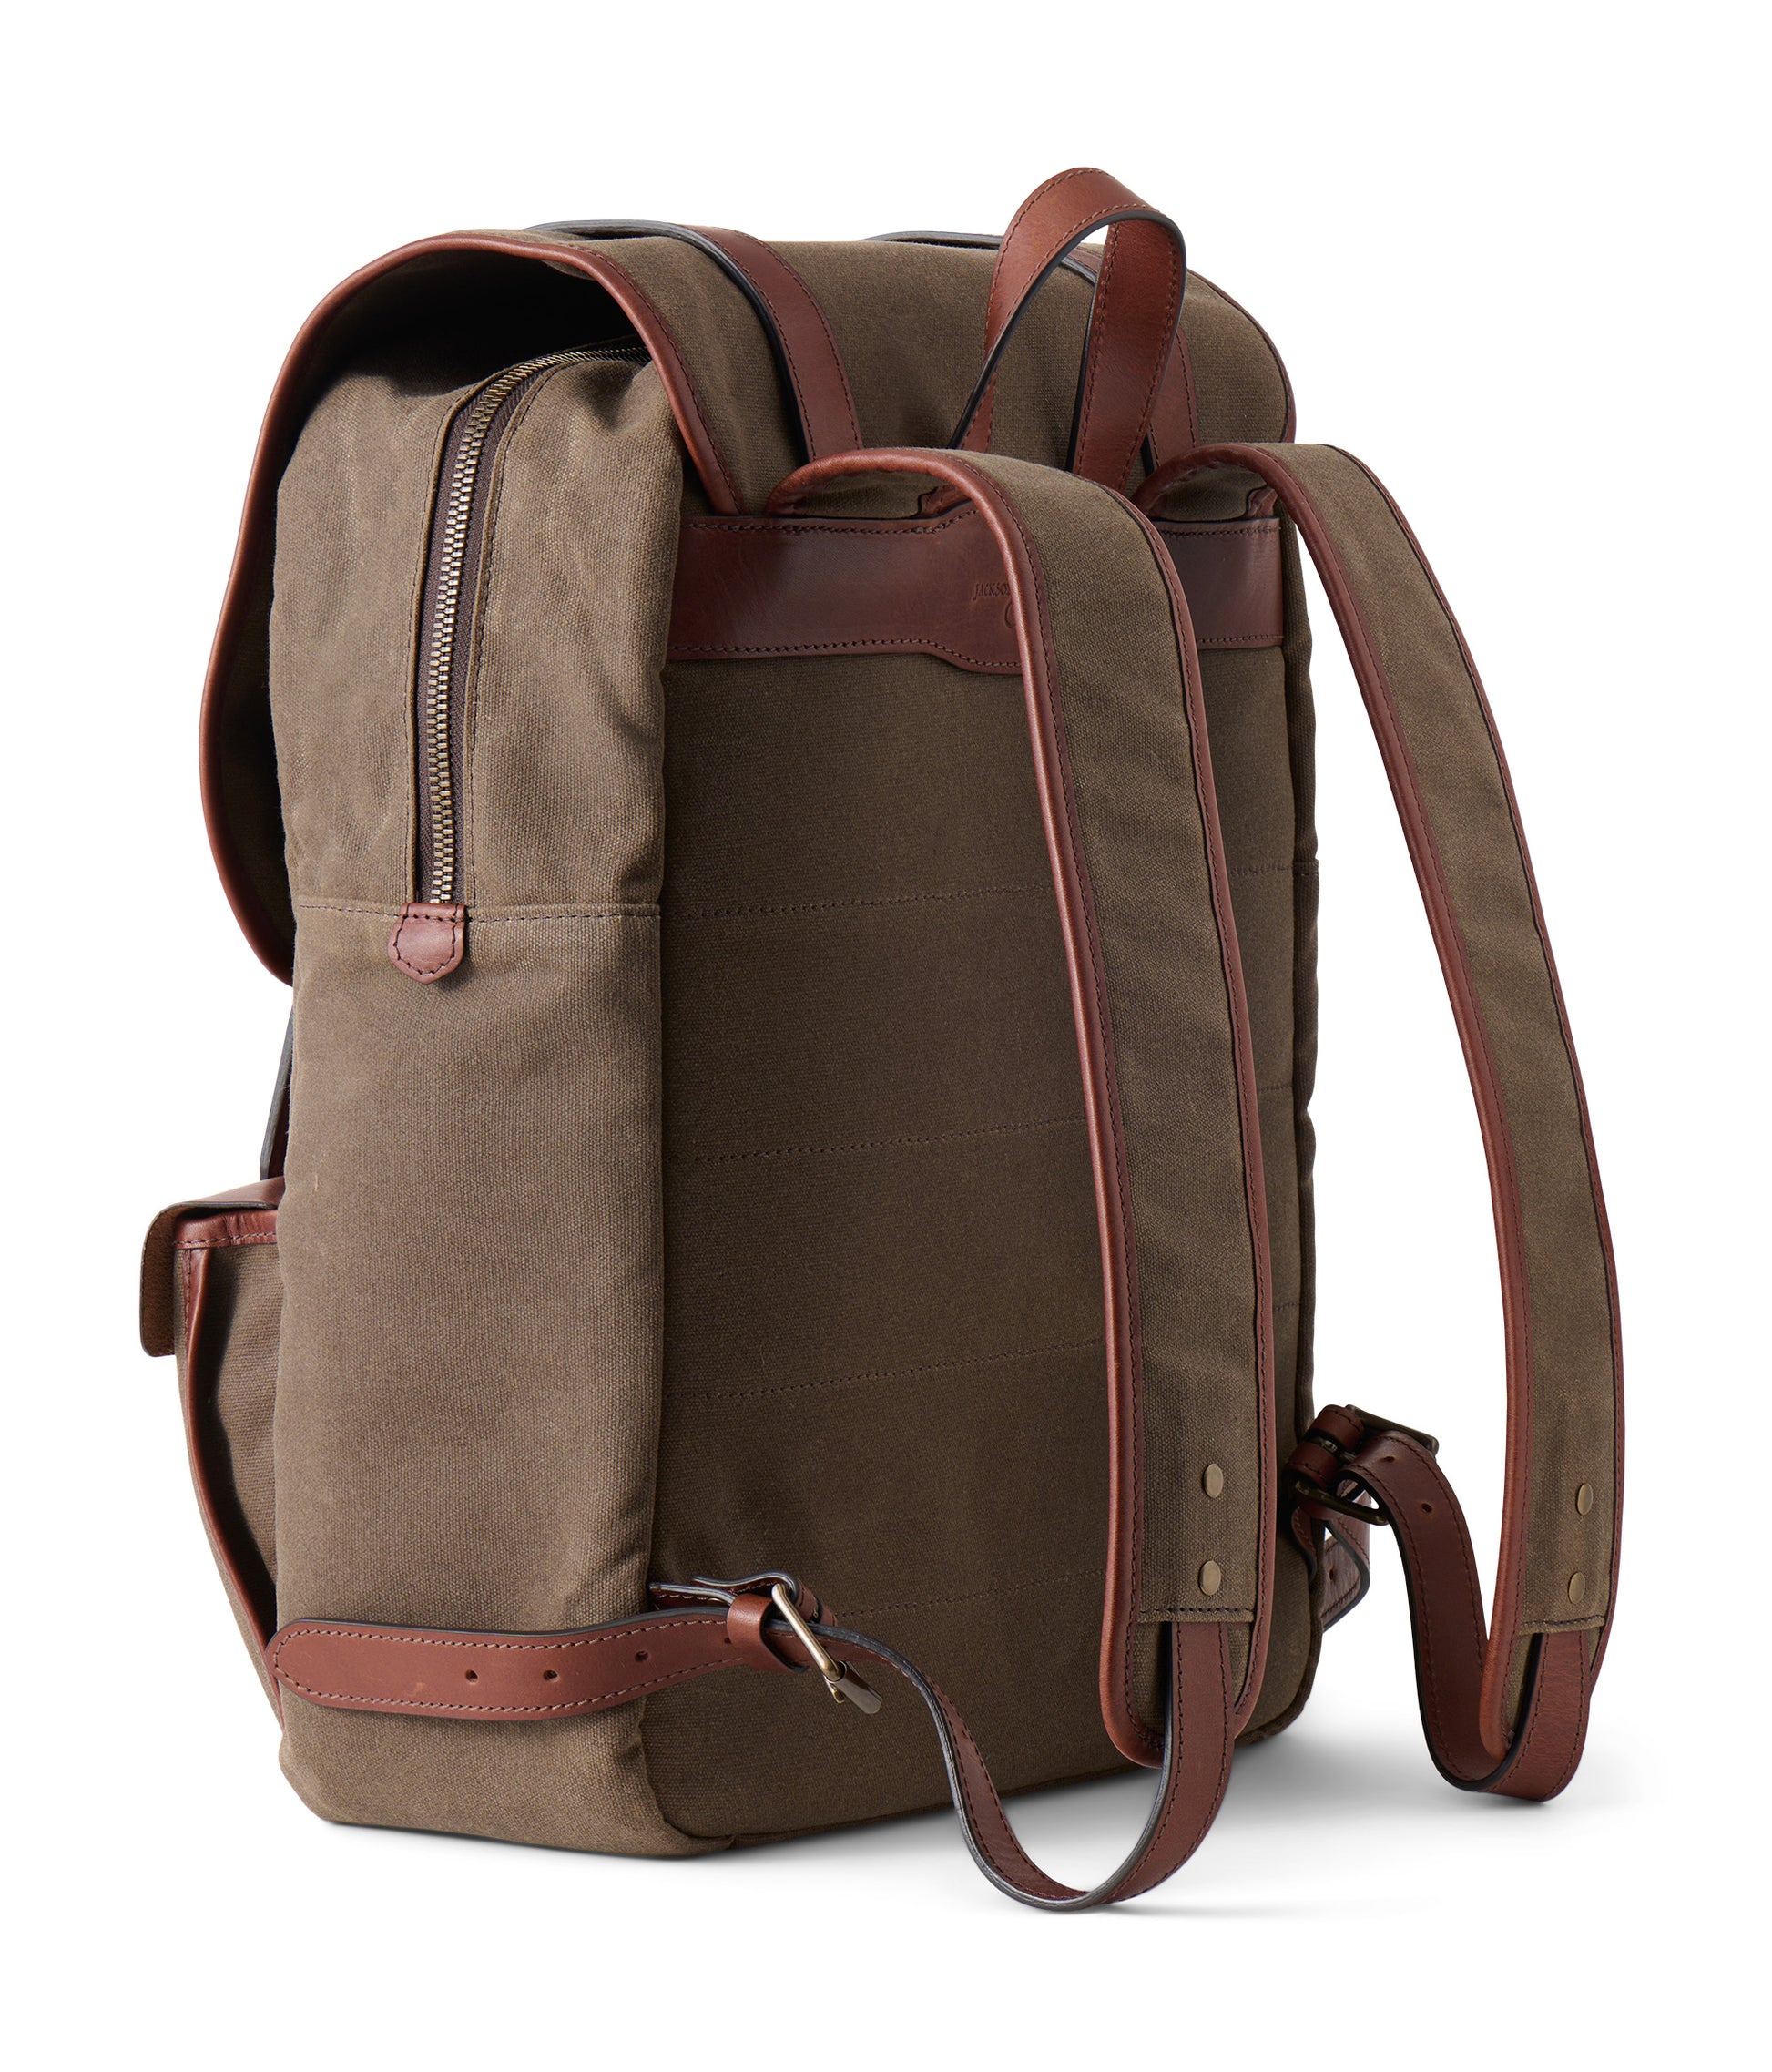 Founder's Backpack back angle view, full grain leather & waxed canvas men's adventure backpack 